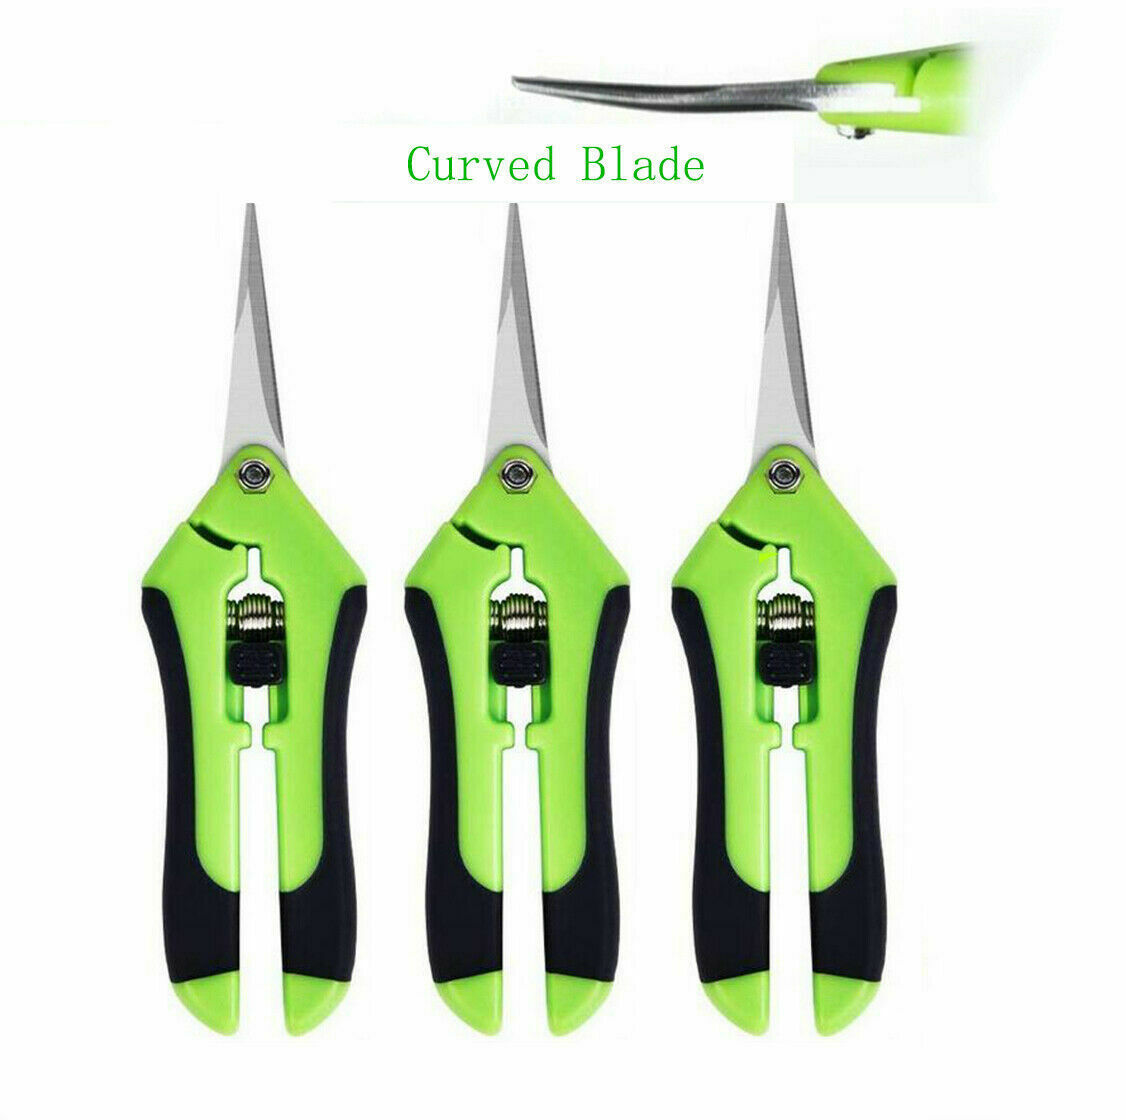 3-pack Curved Blade Garden Scissors Trimmers Harvest Pruning Plants Trimming